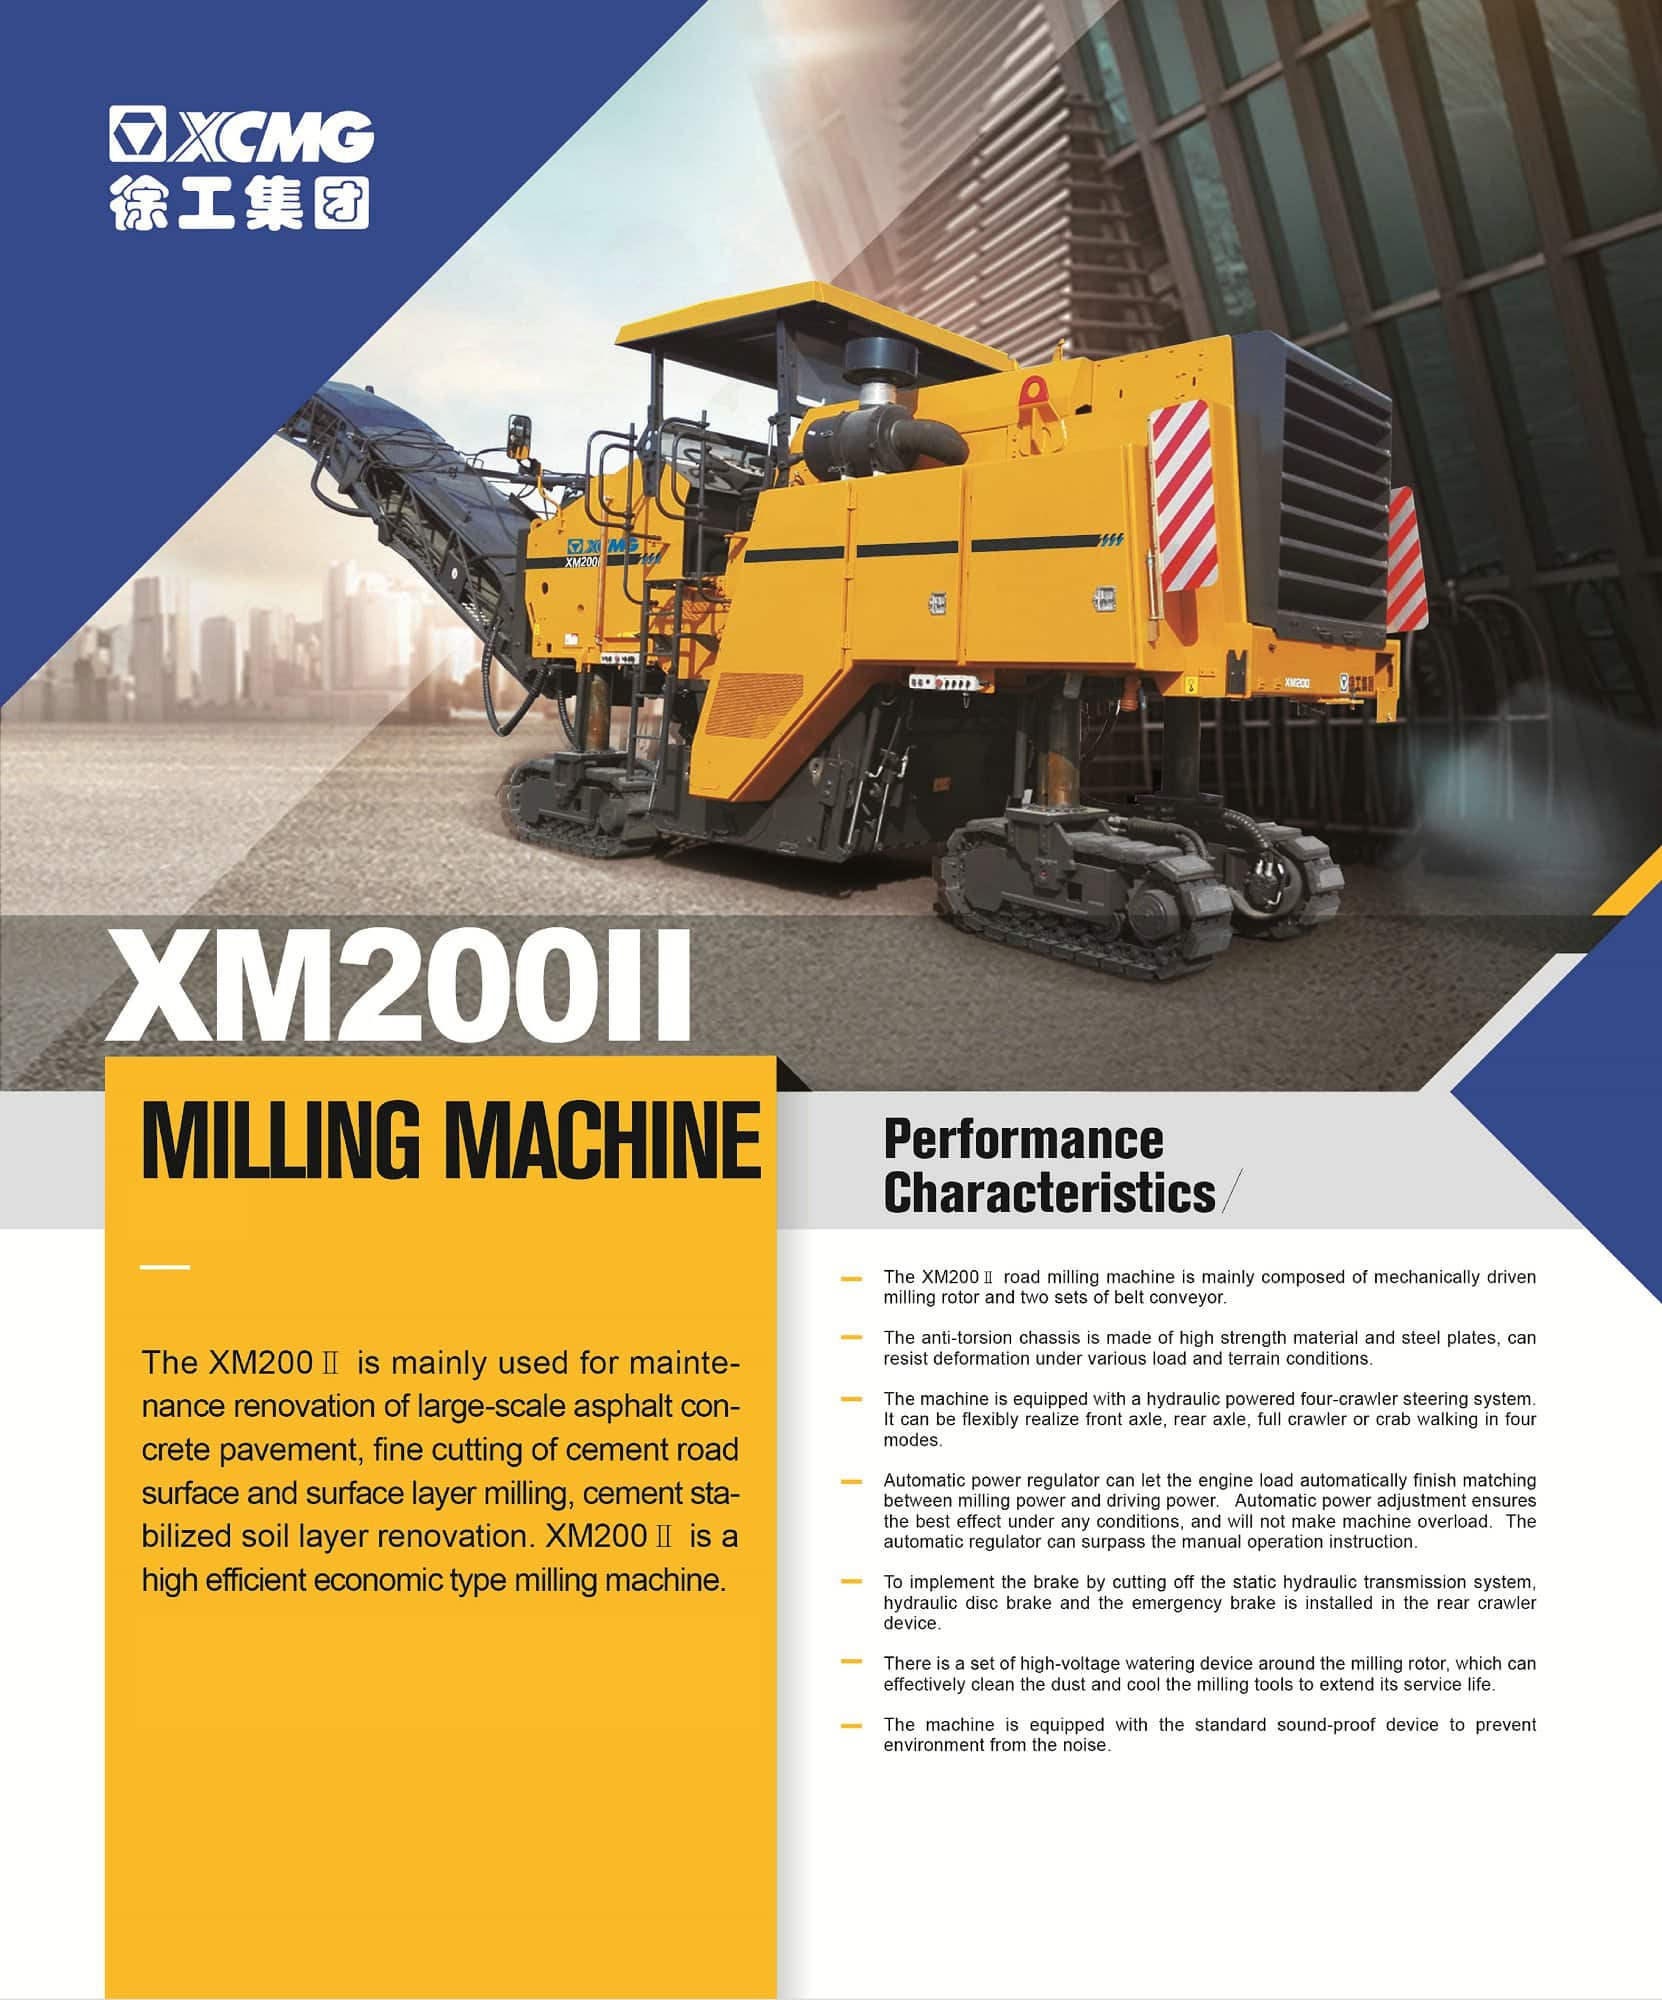 XCMG official XM200Ⅱ milling Machine for sale